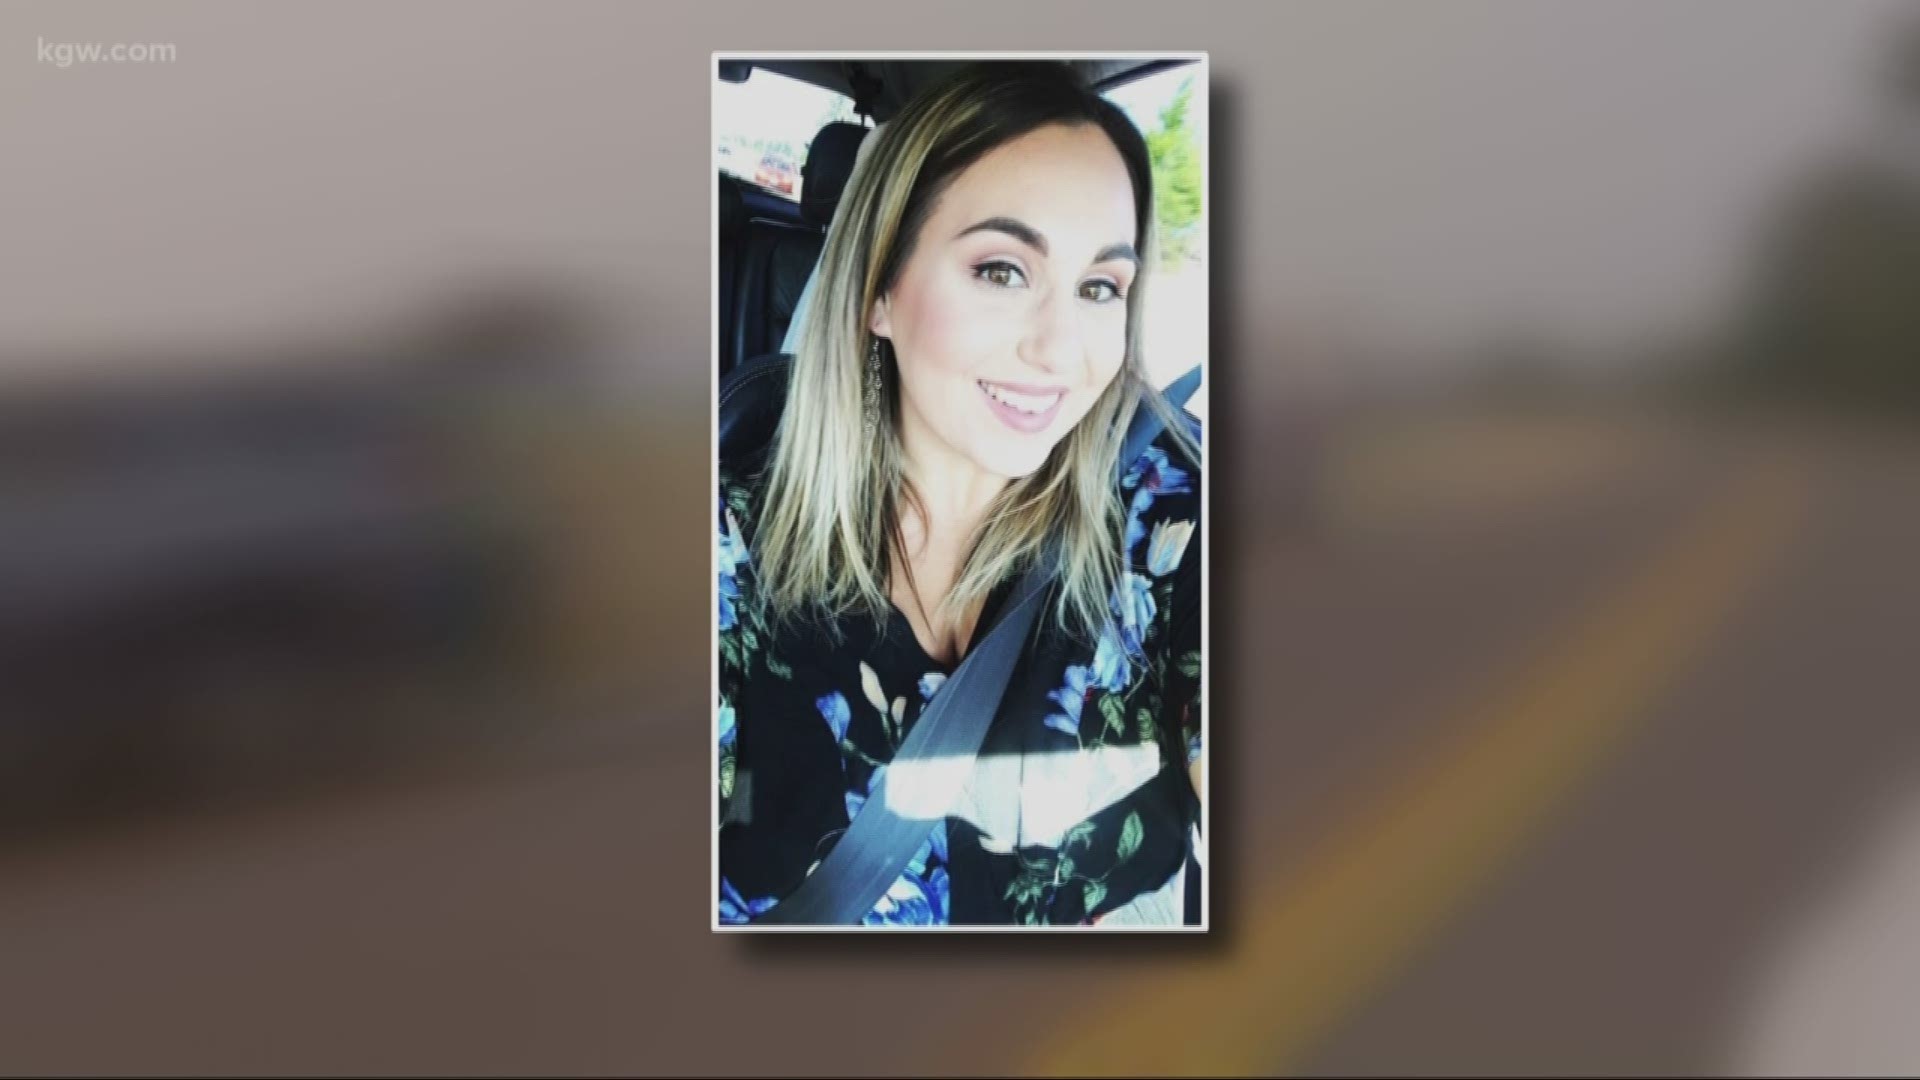 A 27-year-old woman who was missing for several days near Dayton died from possibly falling out of the car while her mother was driving at a high rate of speed according to the Yamhill District Attorney.